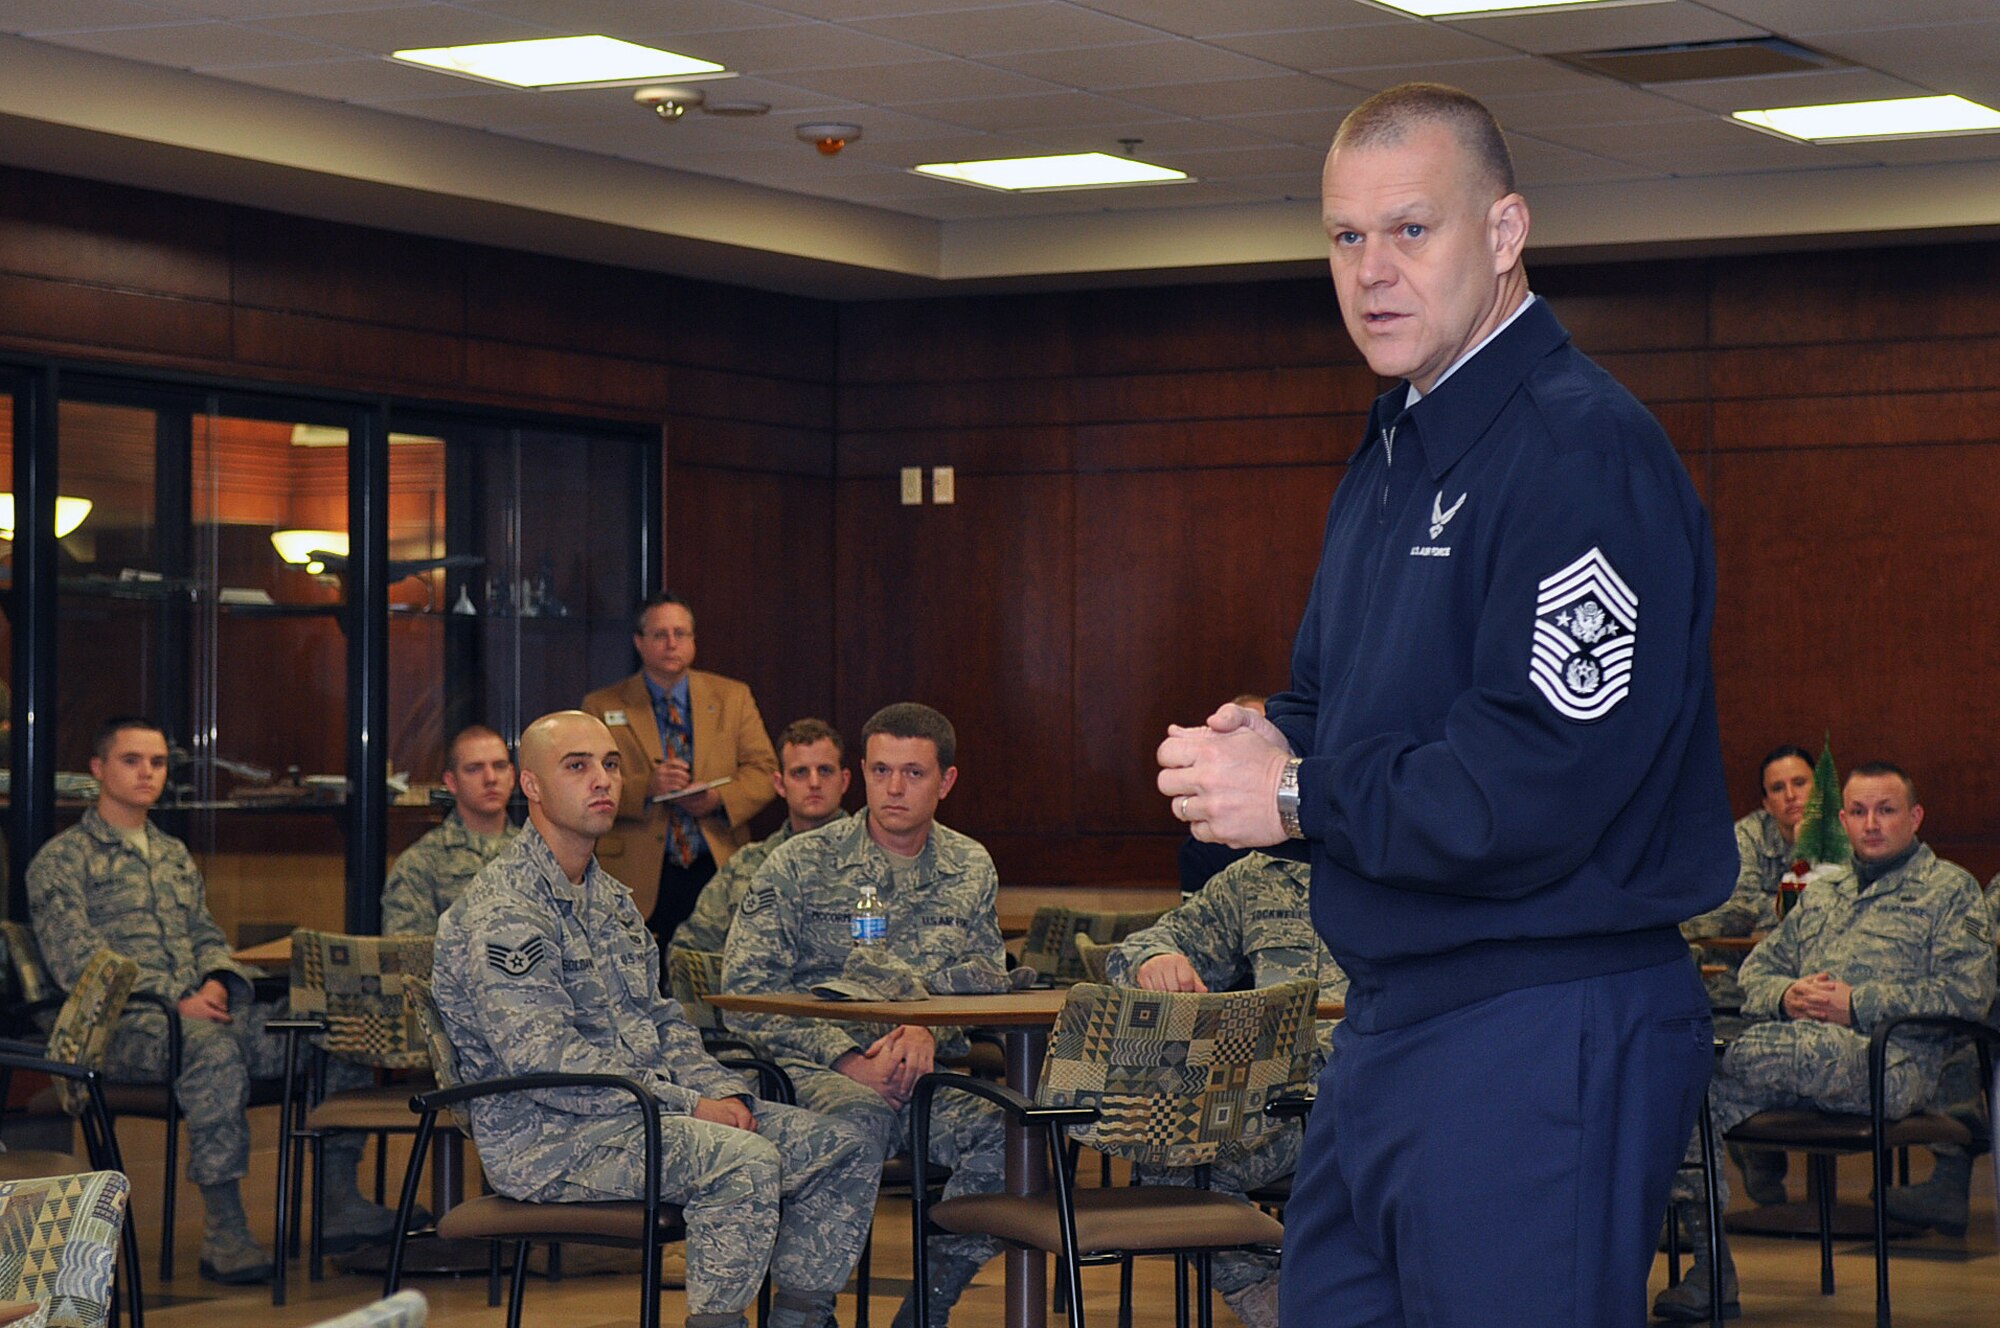 Chief Master Sgt. of the Air Force James A. Roy addresses 505th Command and Control Wing members during a visit to Hurlburt Field, Fla., Dec. 10. Chief Roy also spoke to a joint Air and Space Operations Systems Administration Course. He explained to students how important joint operations and command and control, or C2, synchronization is for today's warfighters. The 505th CCW Vice Commander Col. Mustafa Koprucu provided a mission briefing before Chief Roy toured the wing. (U.S. Air Force photo/Keith Keel)